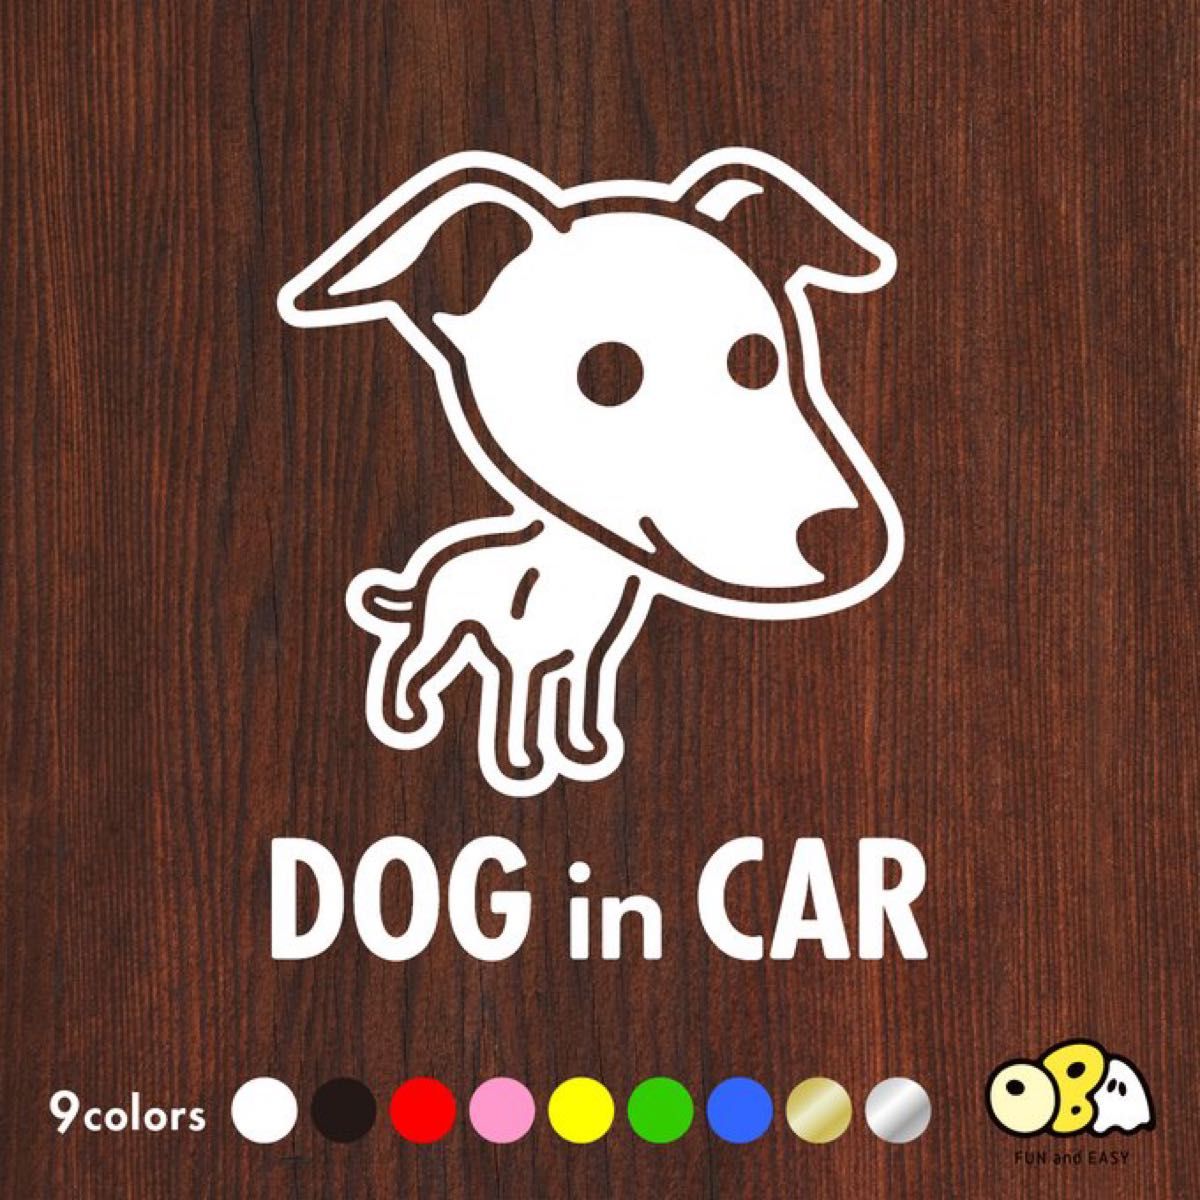 DOG IN CAR/イタリアン・グレーハウンドA カッティングステッカー KIDS in CAR SAFETY DRIVE